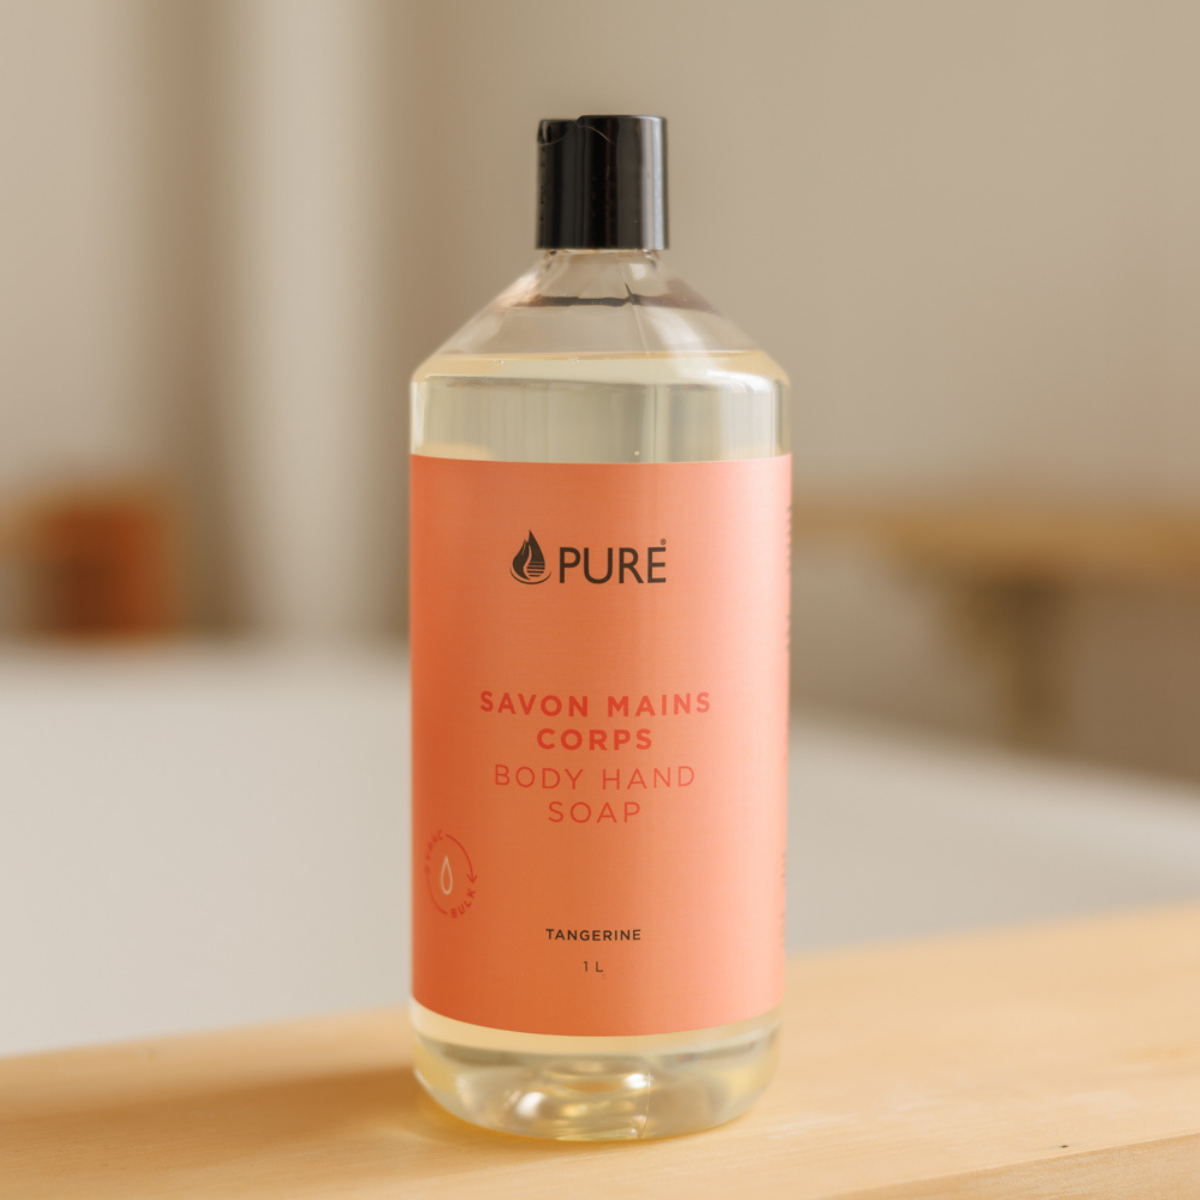 Pure_0425_savon_mains_corps_body_hand_soap_tangerine_1L_2.png